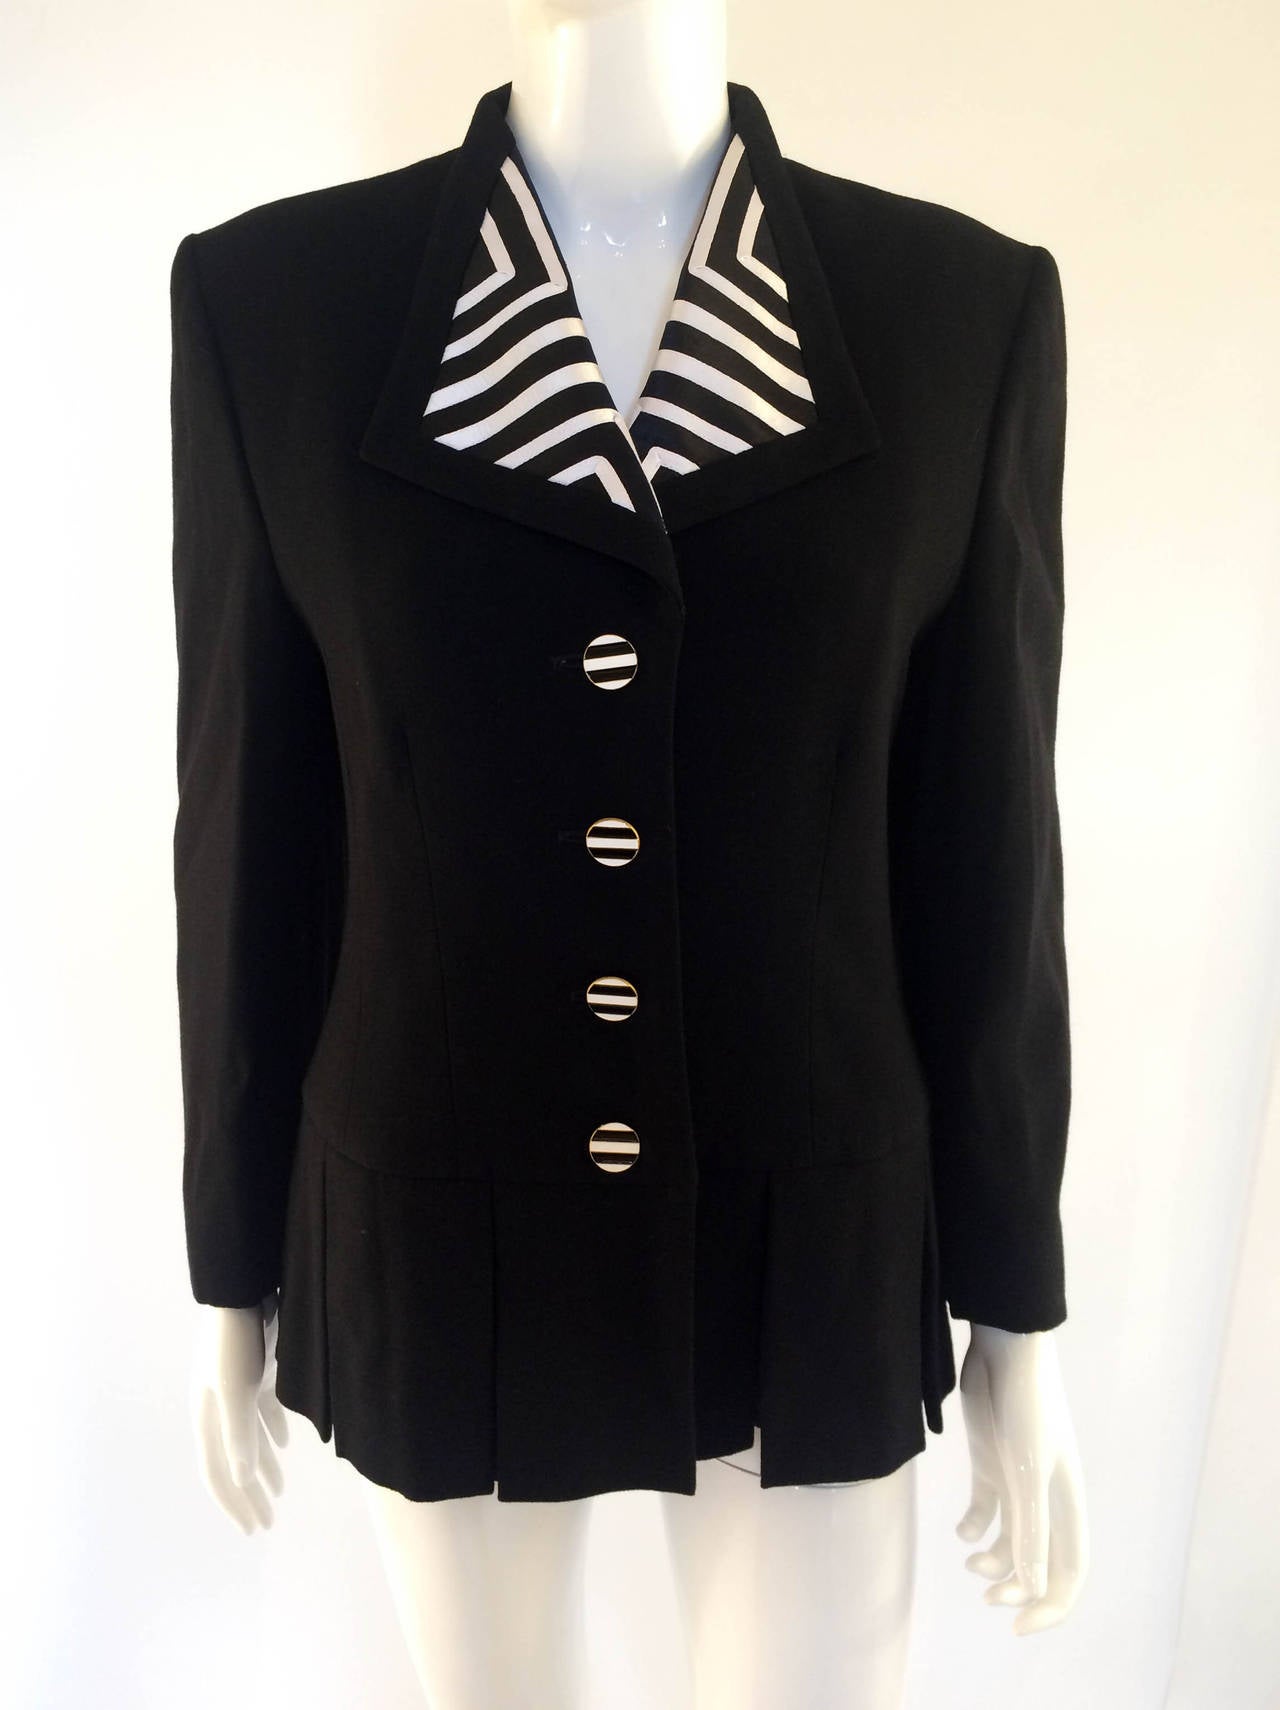 Very classy Vintage Louis Feraud Wool Jacket. This black jacket is single breasted, with a peplum of wide pleads creating a flattering silhouette. The lapel, back of the neck and the enamelled metal buttons are decorated with black and white